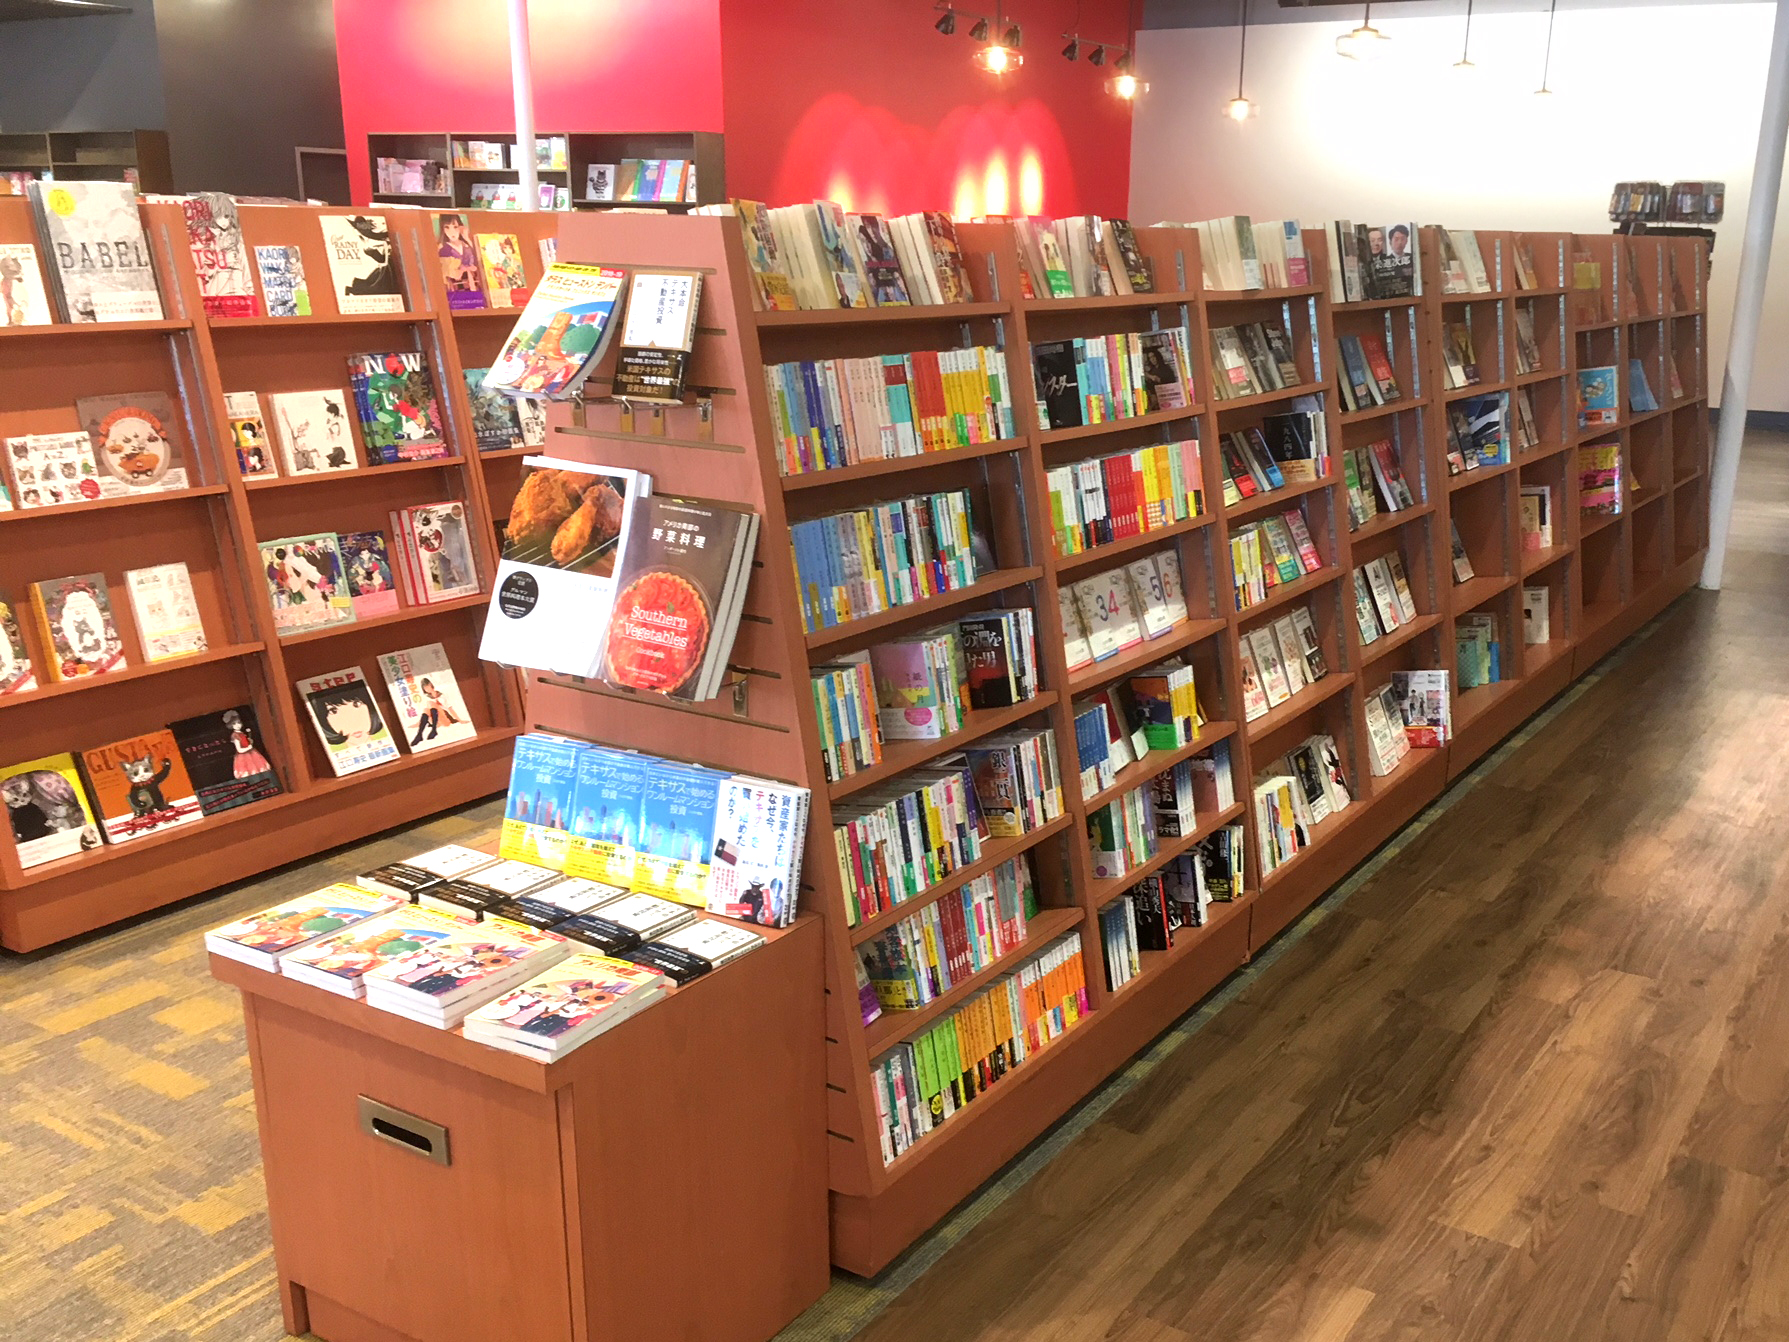 Kinokuniya Book Store S Grand Opening Events In Austin August 18 Through 19th Include Live Music Authors Illustrators Cosplay J Fashion And Live Painting Store list (directory), locations, mall hours, contact and address. kinokuniya book store s grand opening